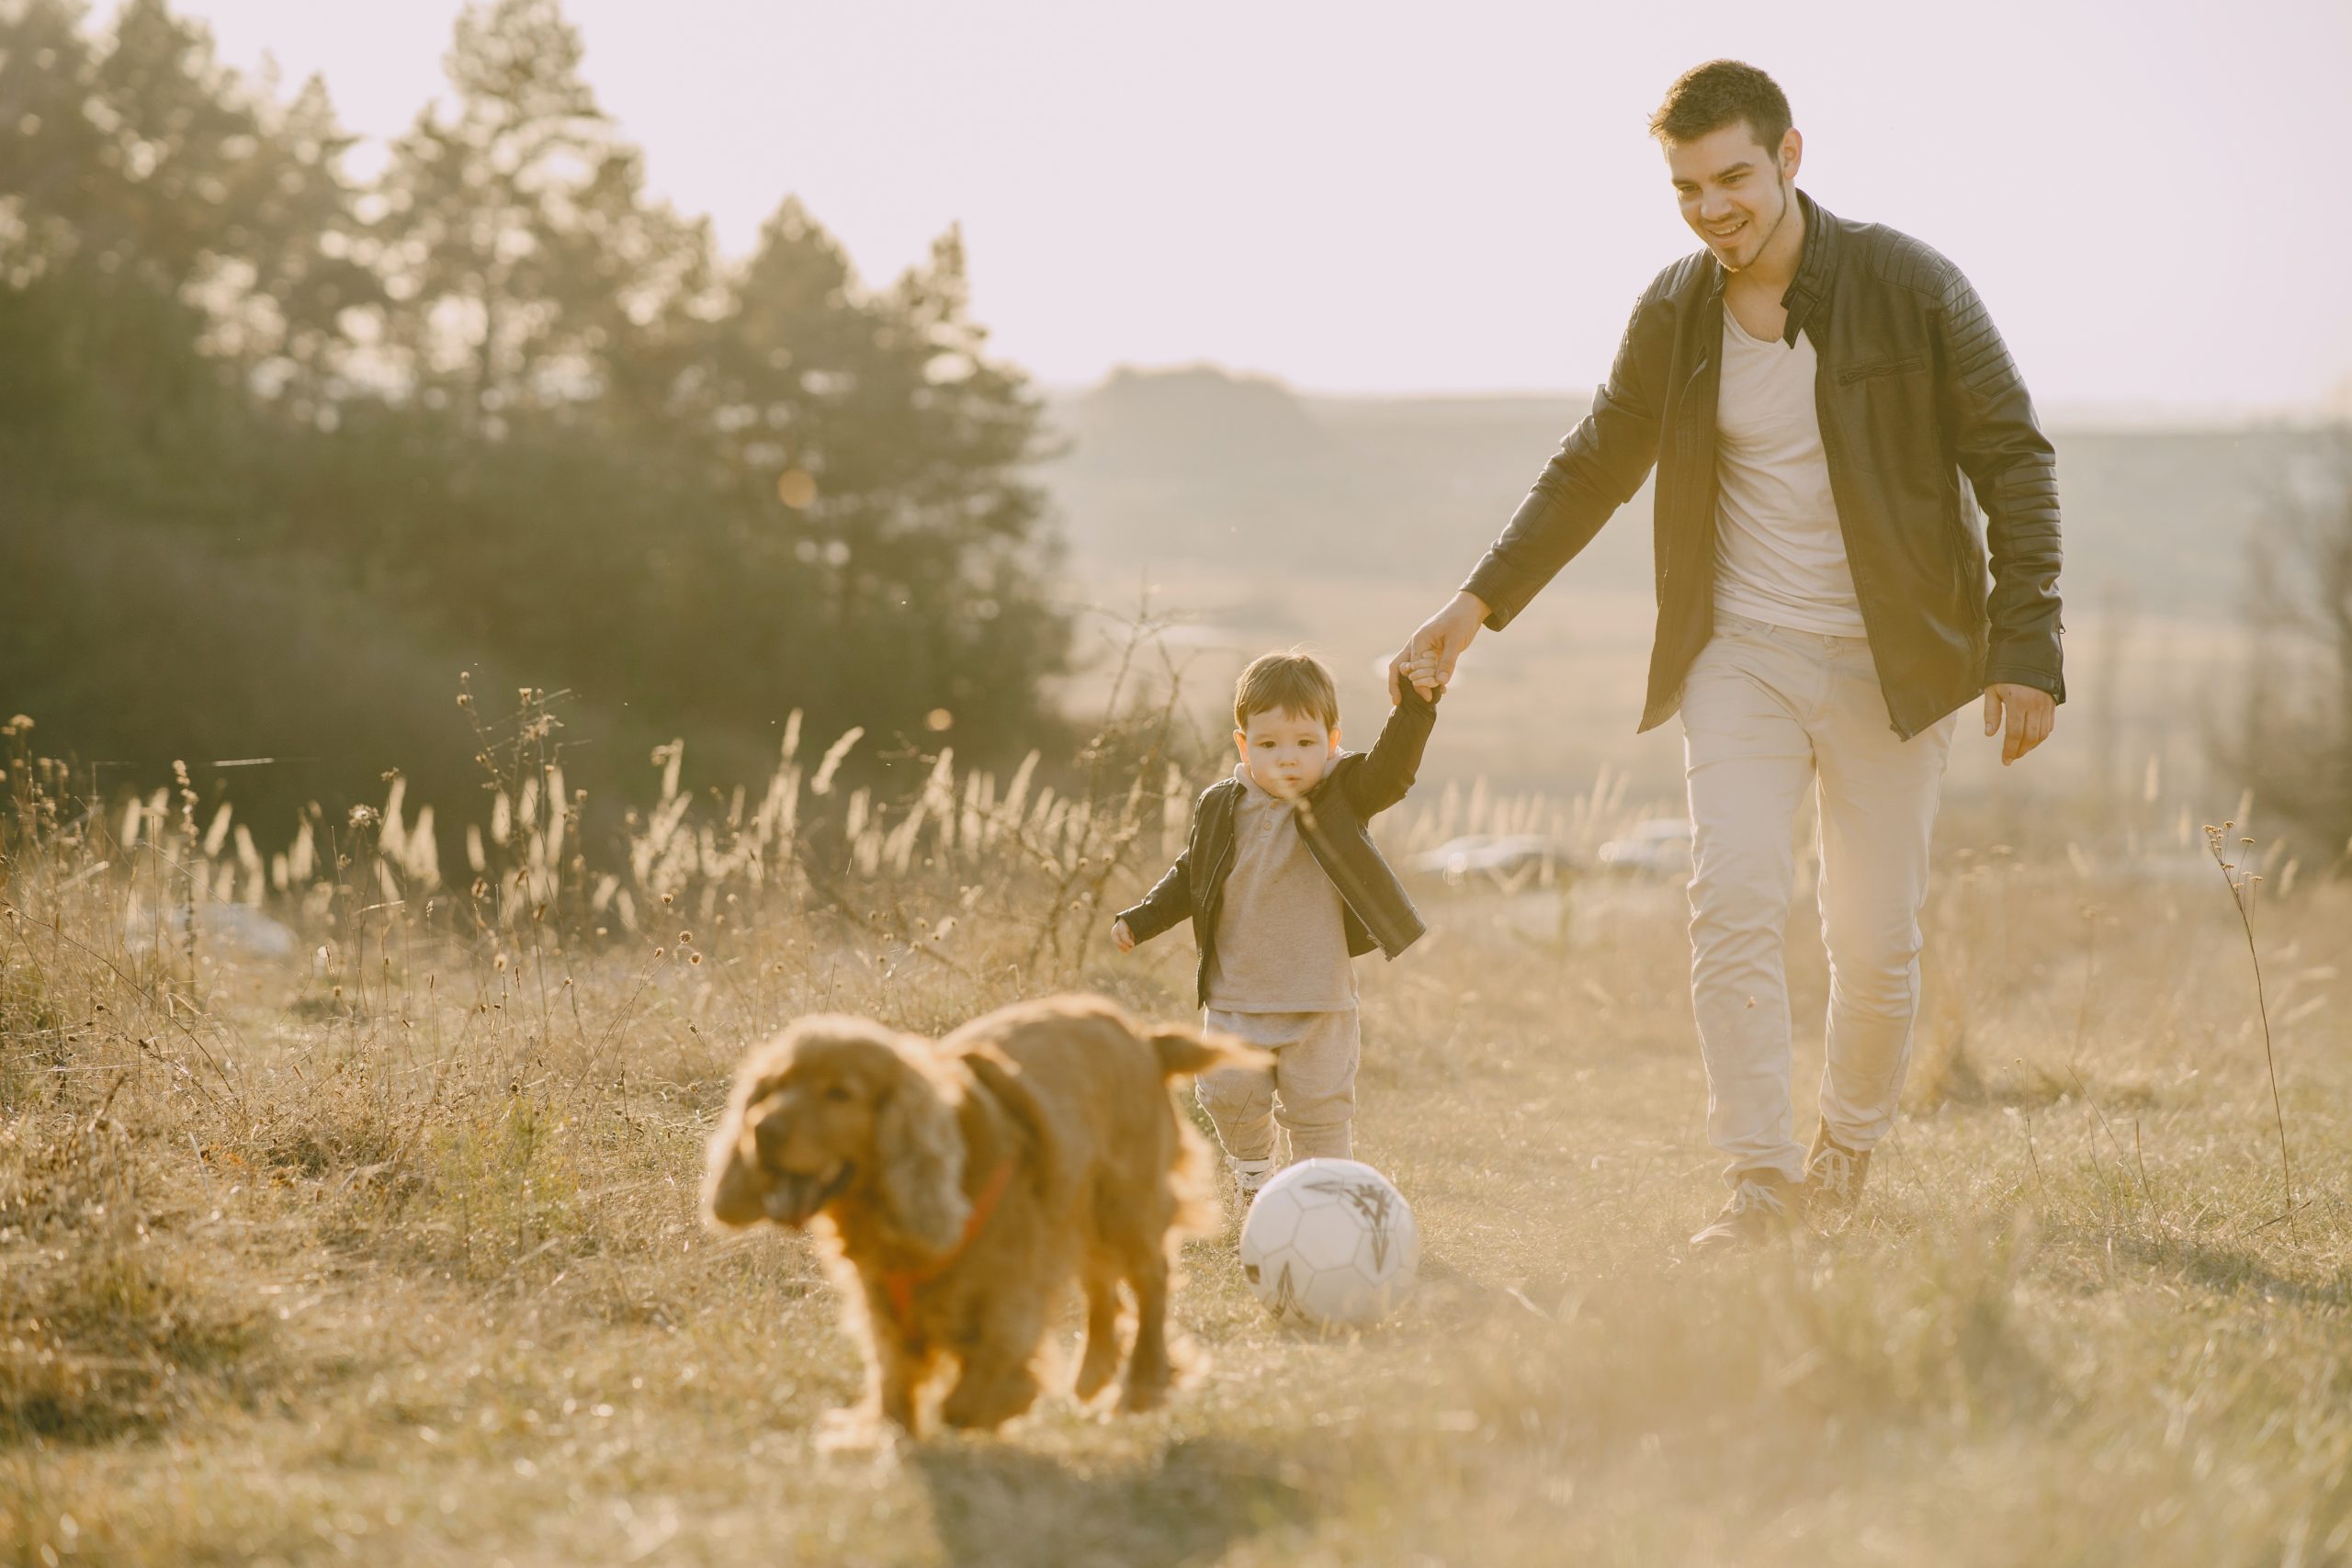 Blog - photo-of-man-holding-his-child-while-walking-on-grass-field-4148847